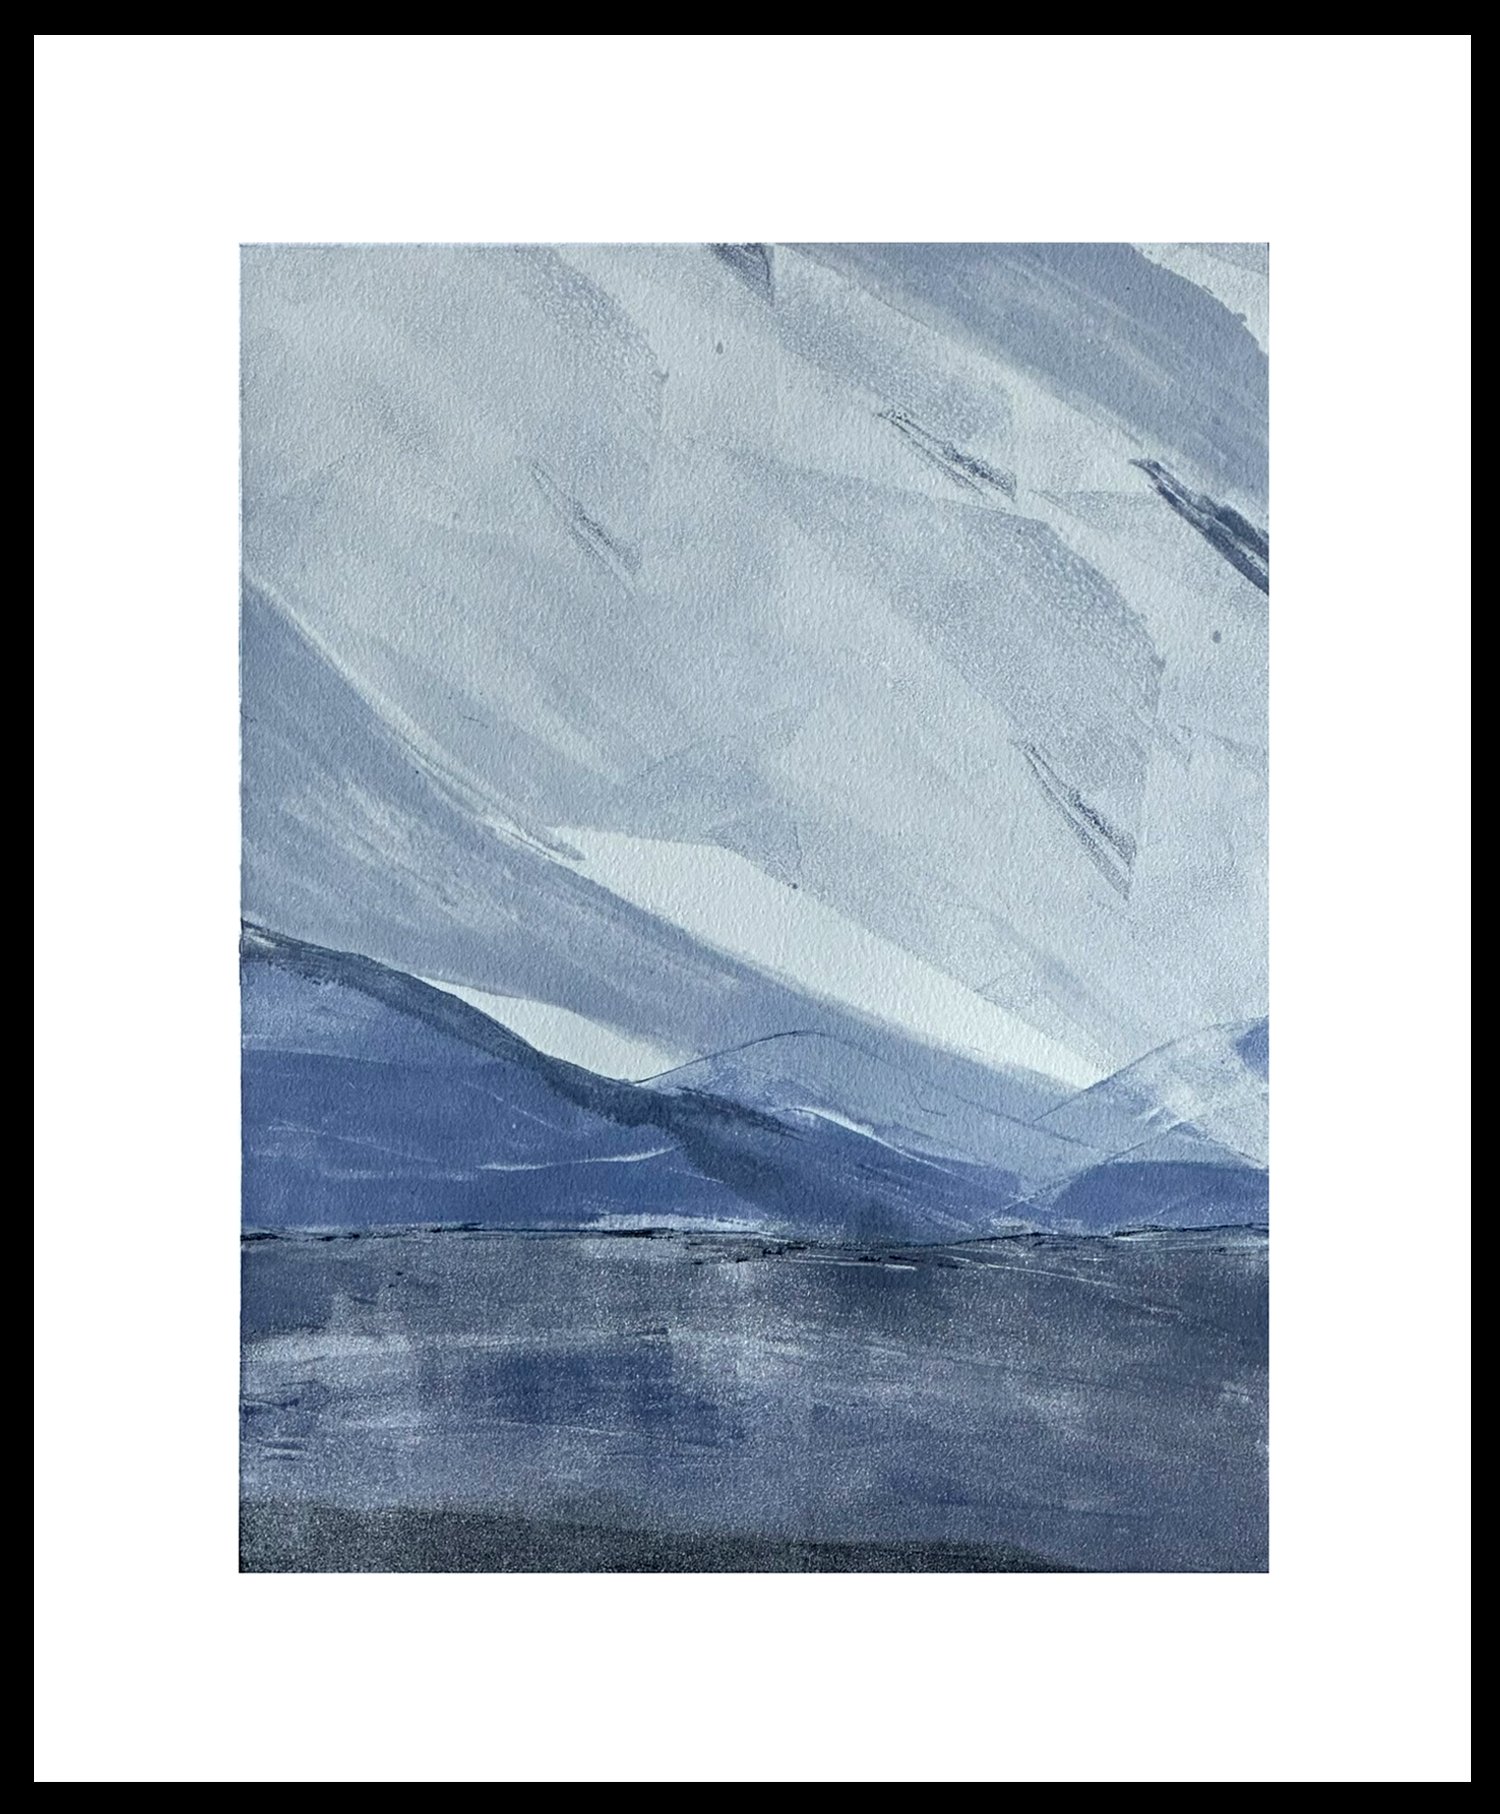    Sail Away With Me   invites you on a serene escape. This monotype with its muted tones and swirling textures captures the tranquility of a lone sailboat resting on a calm lake. Let the artwork inspire you to dream of faraway adventures and the pea